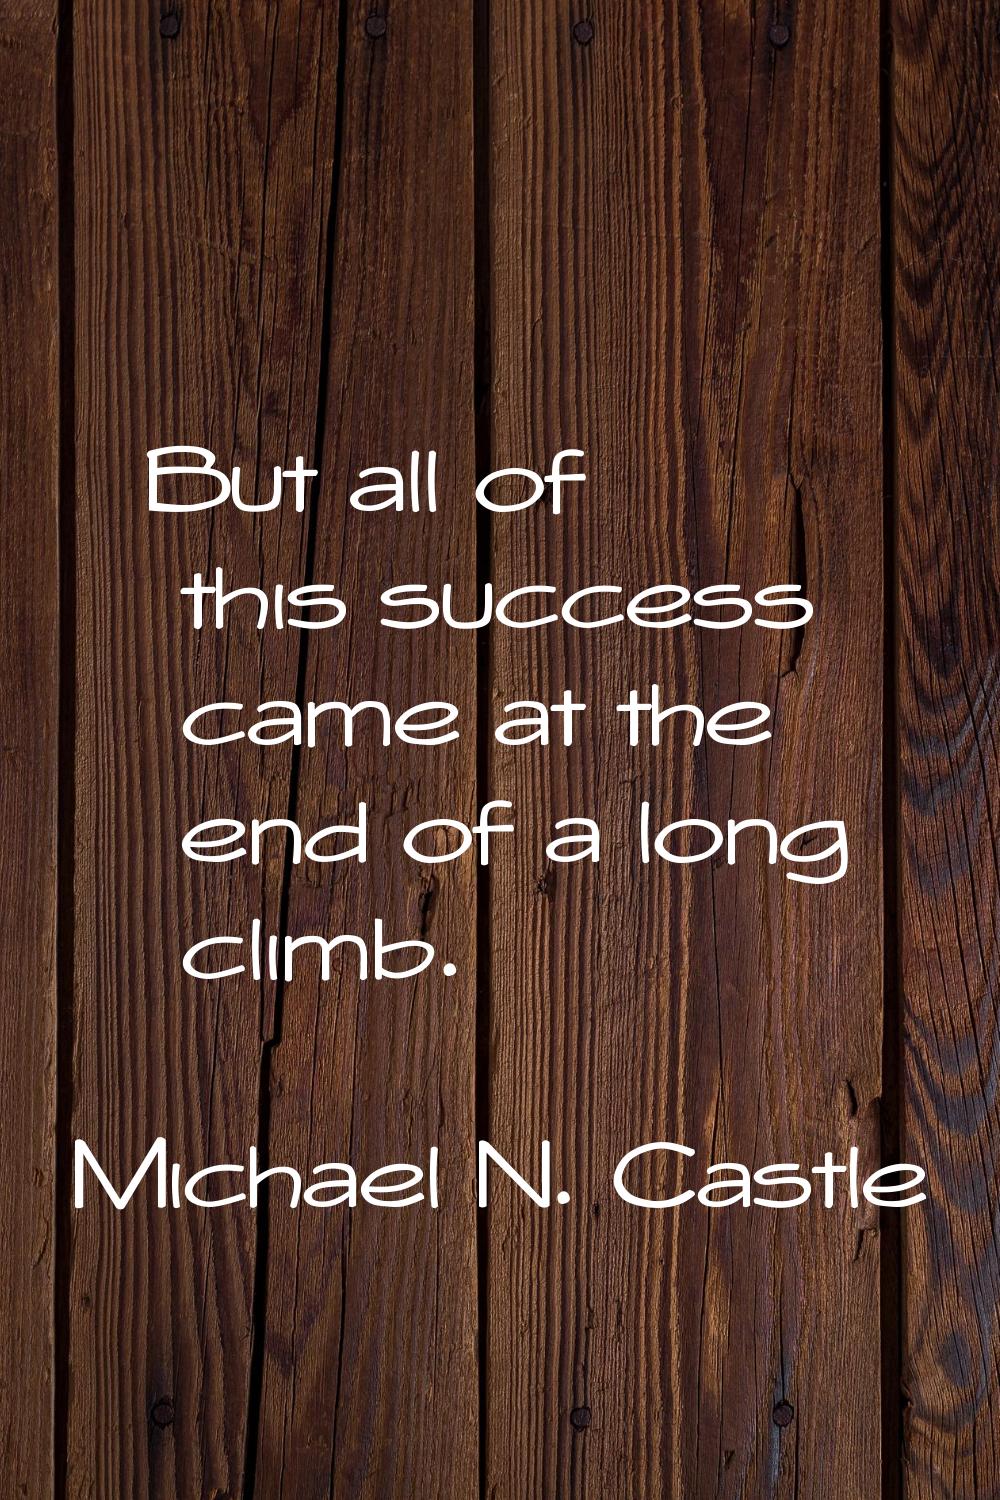 But all of this success came at the end of a long climb.